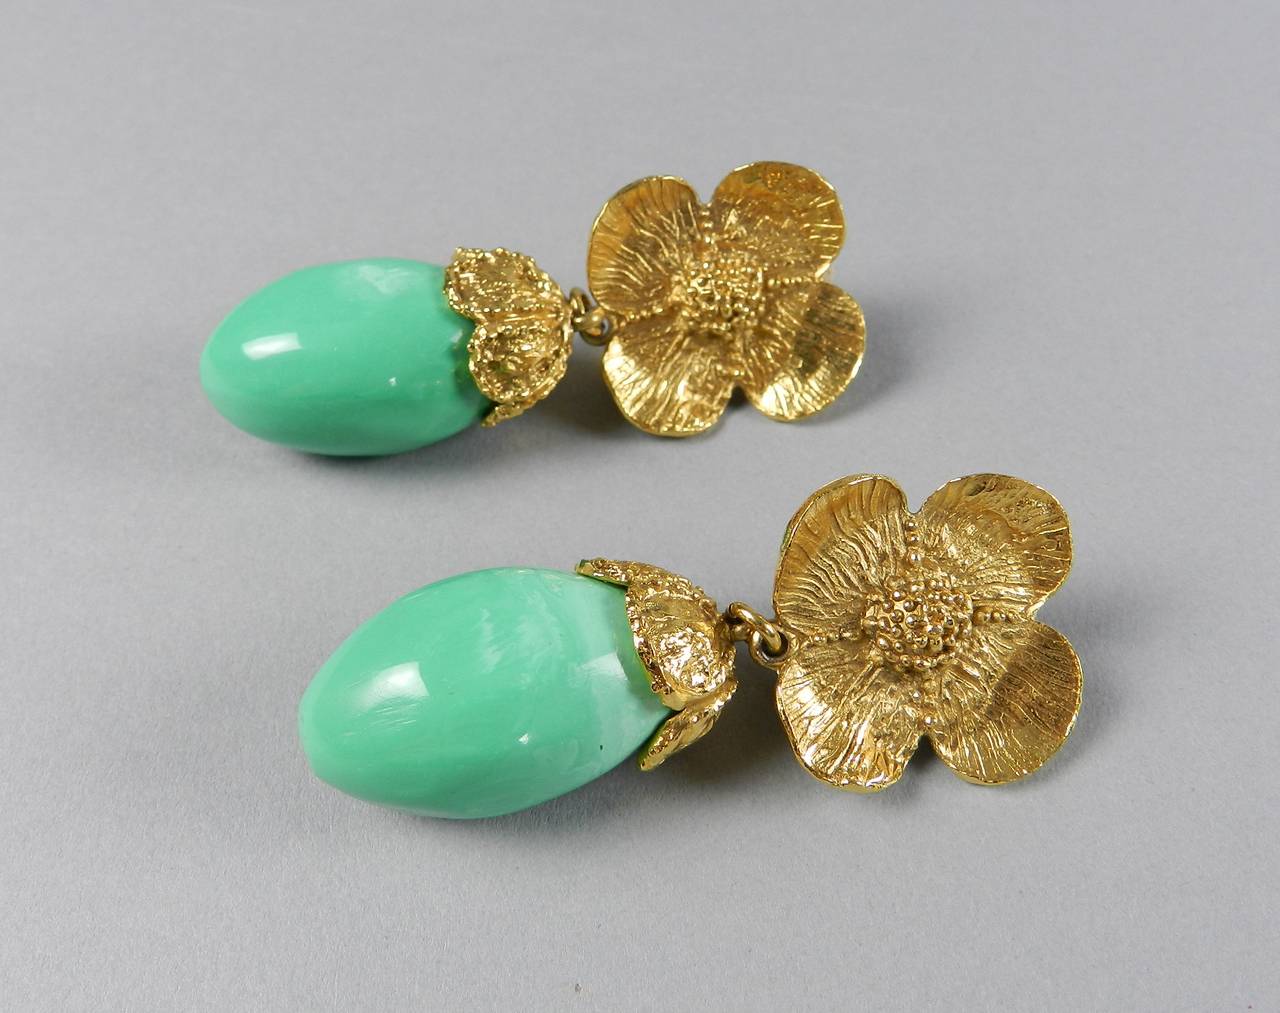 Vintage circa 1980's YSL Yves Saint Laurent mint green resin and gilt floral drop earrings. Clip on. Excellent vintage condition. Measures 2.5